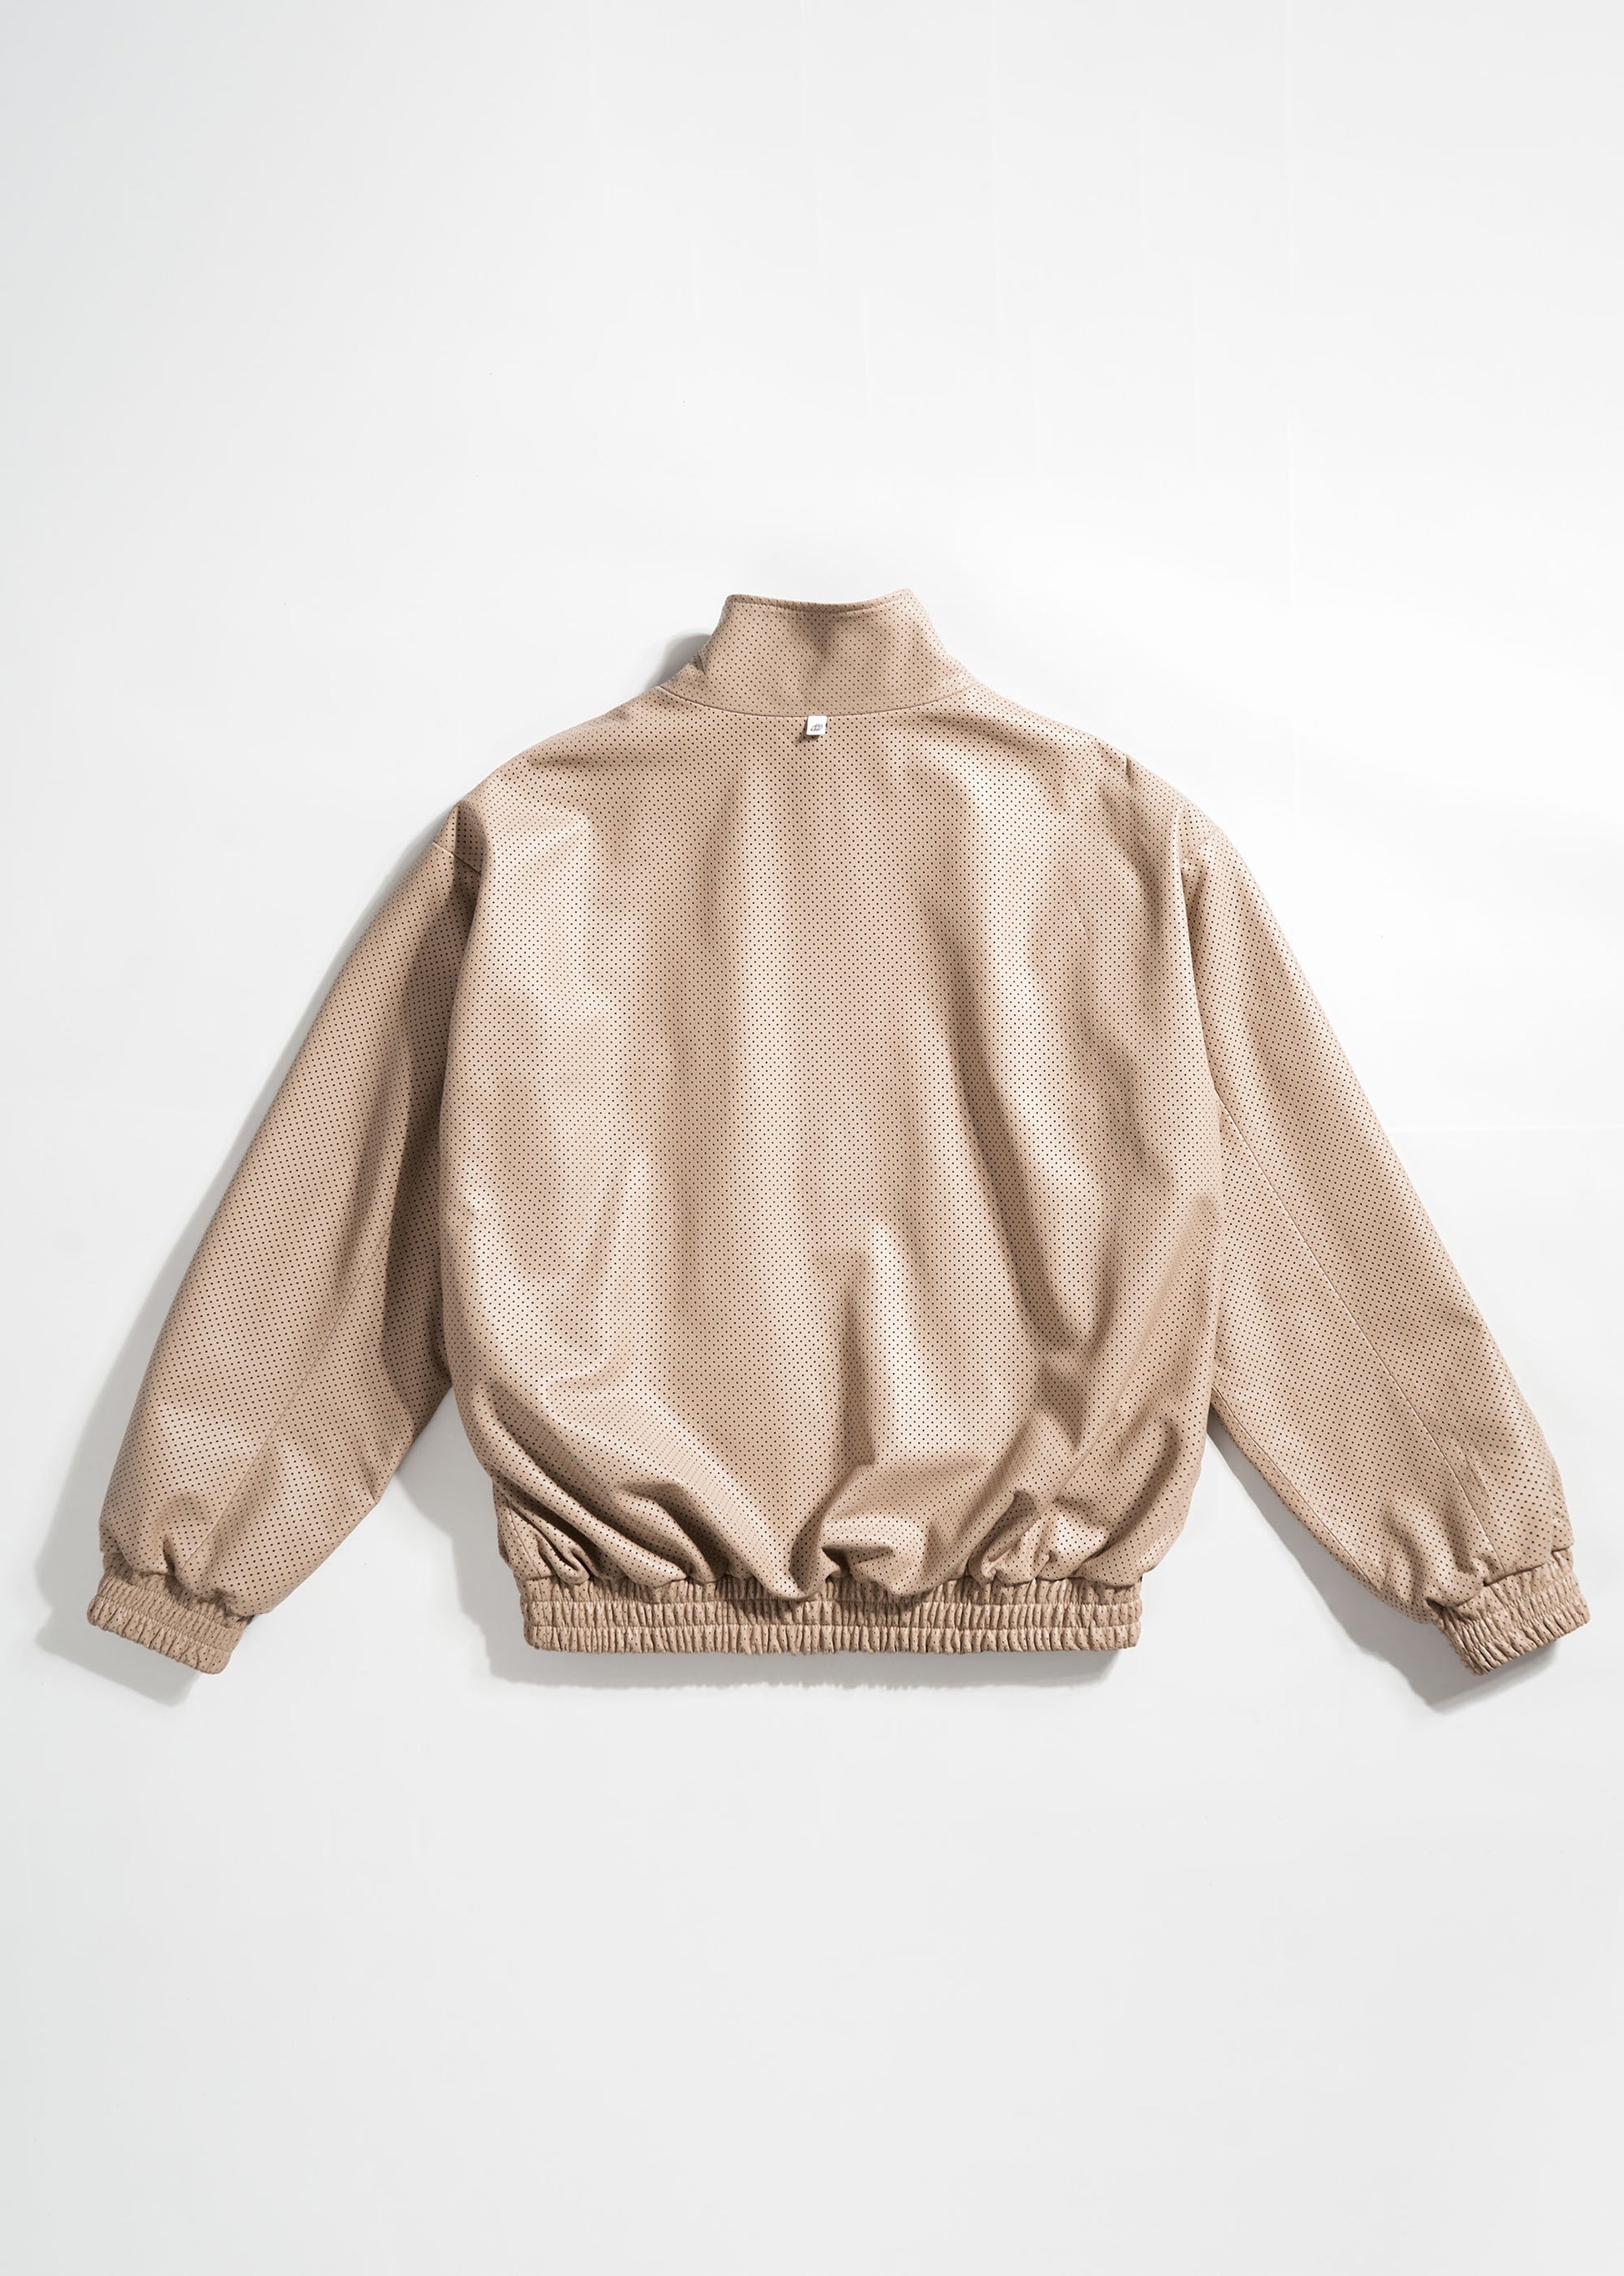 PERFORATED LEATHER TRACK JACKET - Due Diligence Apparel